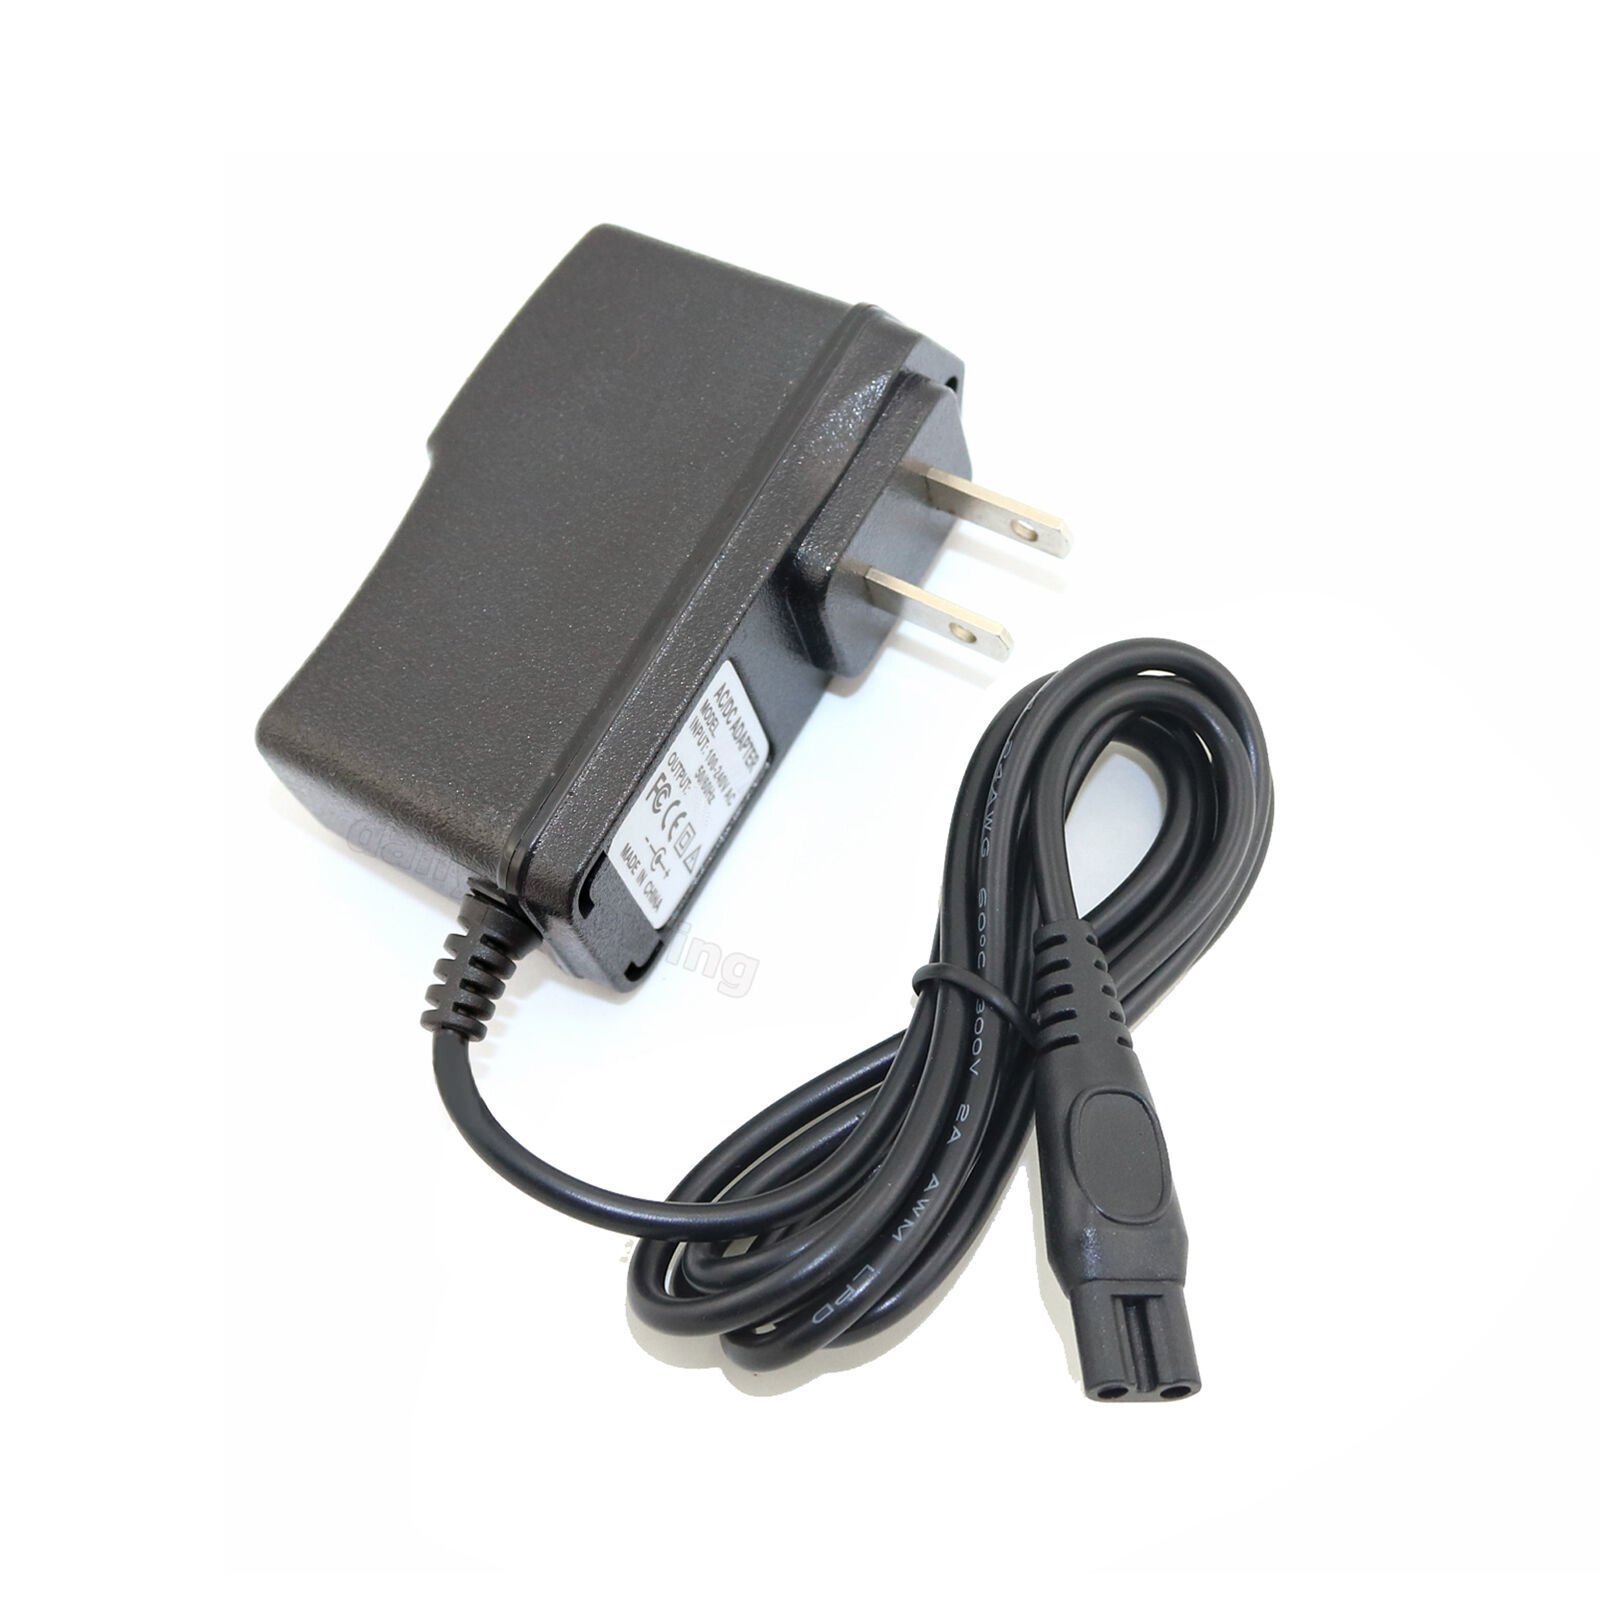 Primary image for Ac Adapter Charger For Philips Norelco Shaver Hq7310 Hq7300 Hq7290 Hq7260